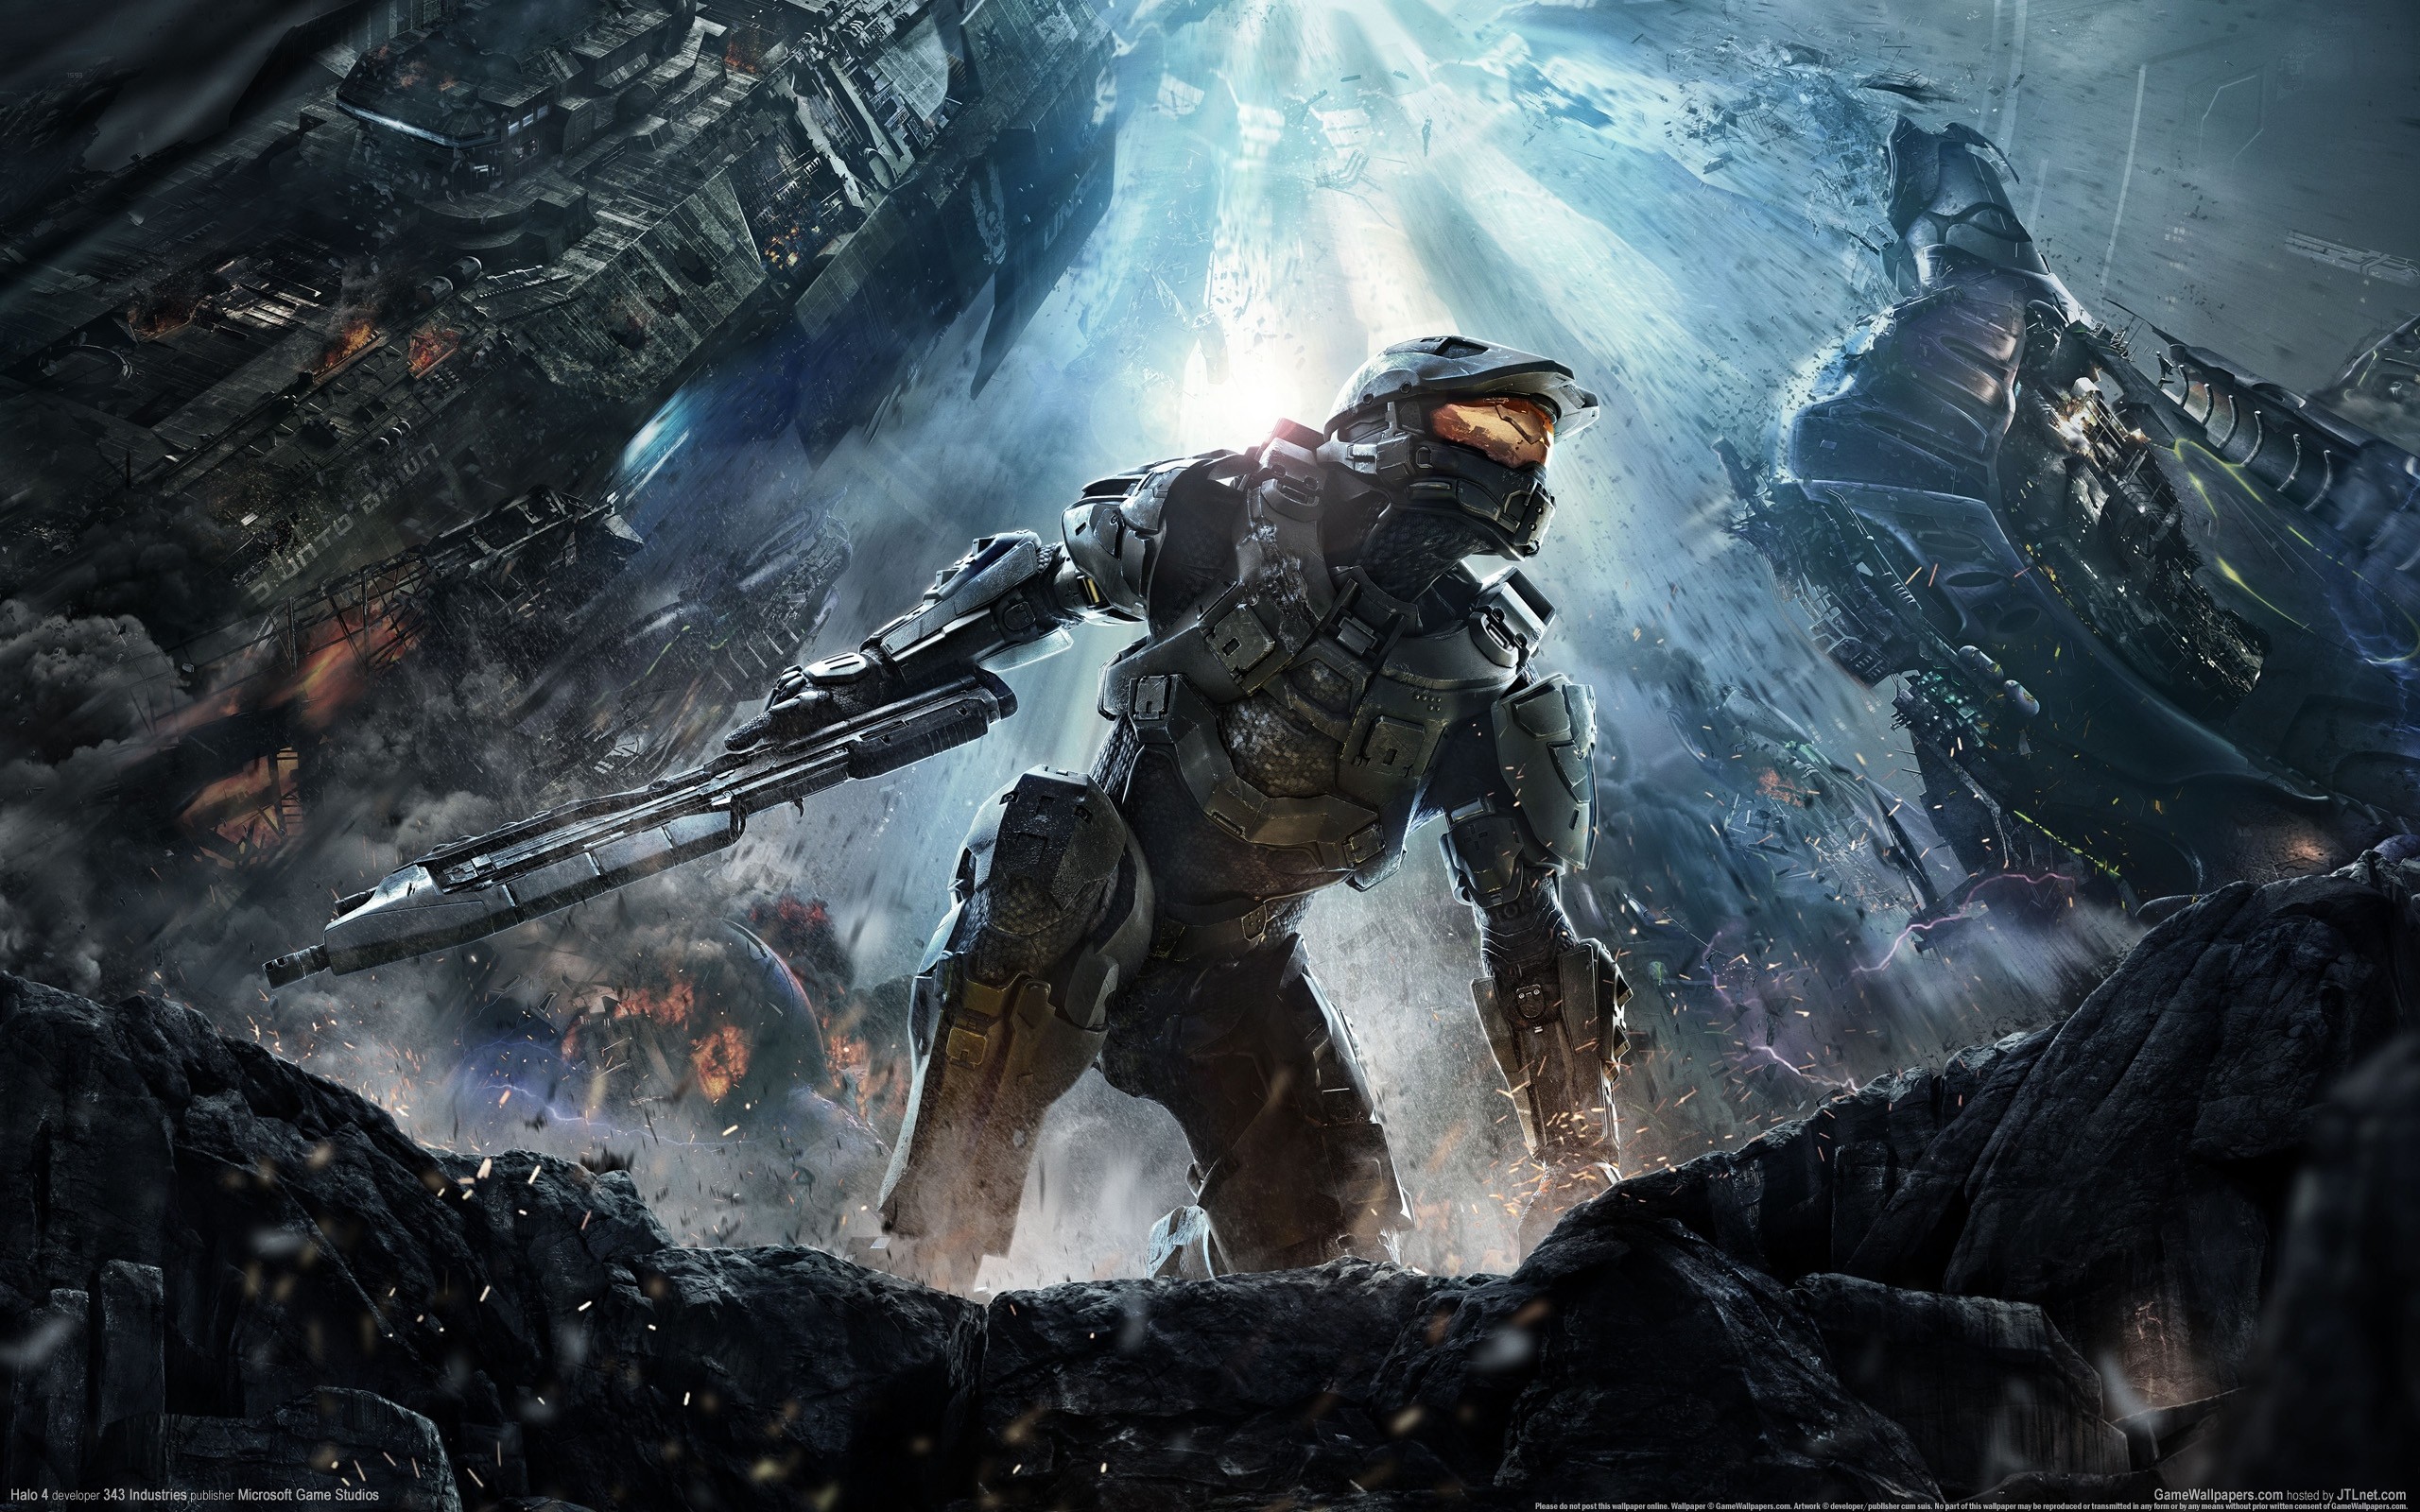 General 2560x1600 Halo 4 video games concept art low-angle 343 Industries Microsoft video game art science fiction Master Chief (Halo)